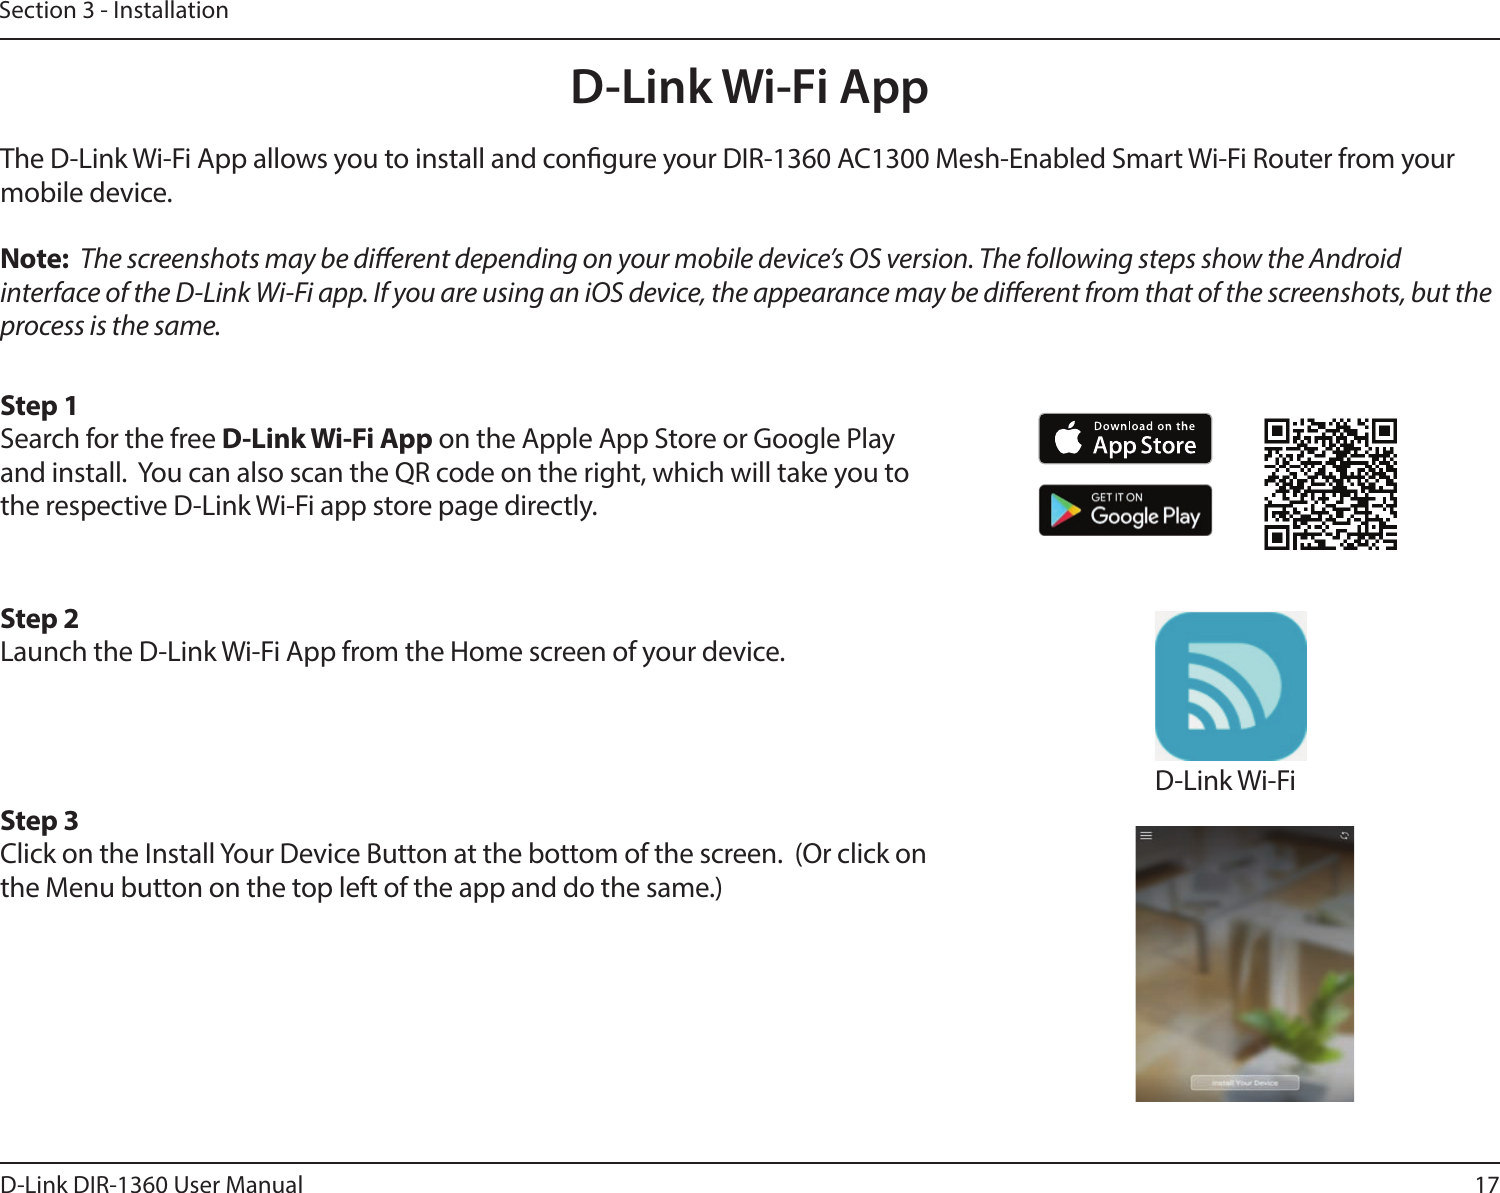 17D-Link DIR-1360 User ManualSection 3 - InstallationD-Link Wi-Fi AppThe D-Link Wi-Fi App allows you to install and congure your DIR-1360 AC1300 Mesh-Enabled Smart Wi-Fi Router from your mobile device.Note:  The screenshots may be dierent depending on your mobile device’s OS version. The following steps show the Android interface of the D-Link Wi-Fi app. If you are using an iOS device, the appearance may be dierent from that of the screenshots, but the process is the same.Step 1Search for the free D-Link Wi-Fi App on the Apple App Store or Google Play and install.  You can also scan the QR code on the right, which will take you to the respective D-Link Wi-Fi app store page directly.Step 2Launch the D-Link Wi-Fi App from the Home screen of your device.Step 3Click on the Install Your Device Button at the bottom of the screen.  (Or click on the Menu button on the top left of the app and do the same.)D-Link Wi-Fi